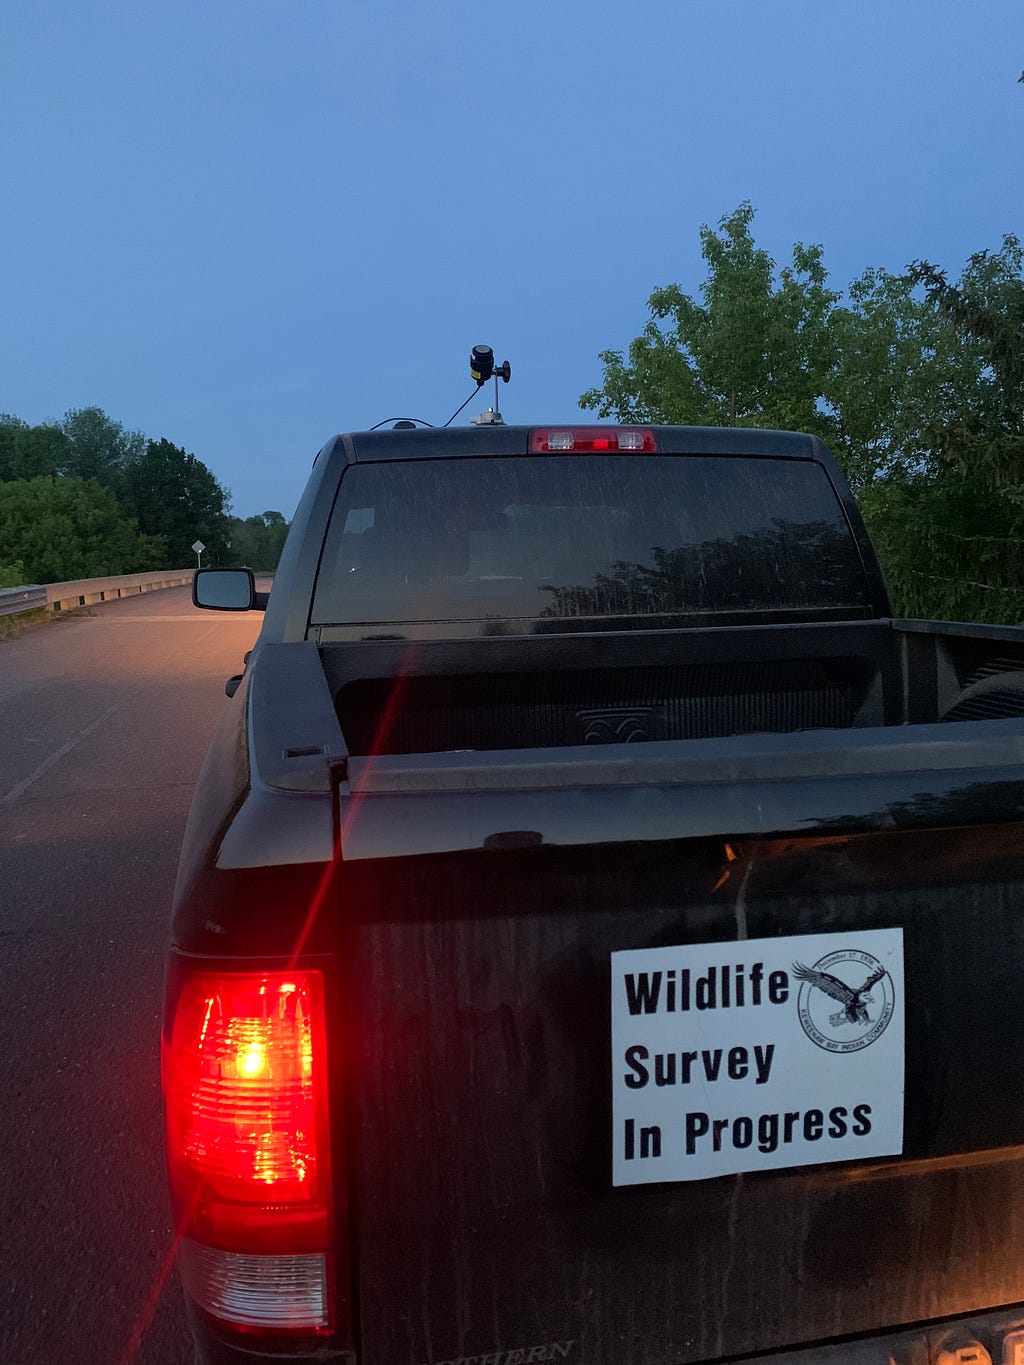 a black truck with a microphone attached to its roof. A bumper sticker on the back of the truck reads “wildlife survey in progress”, with a circular logo of an eagle to the right.